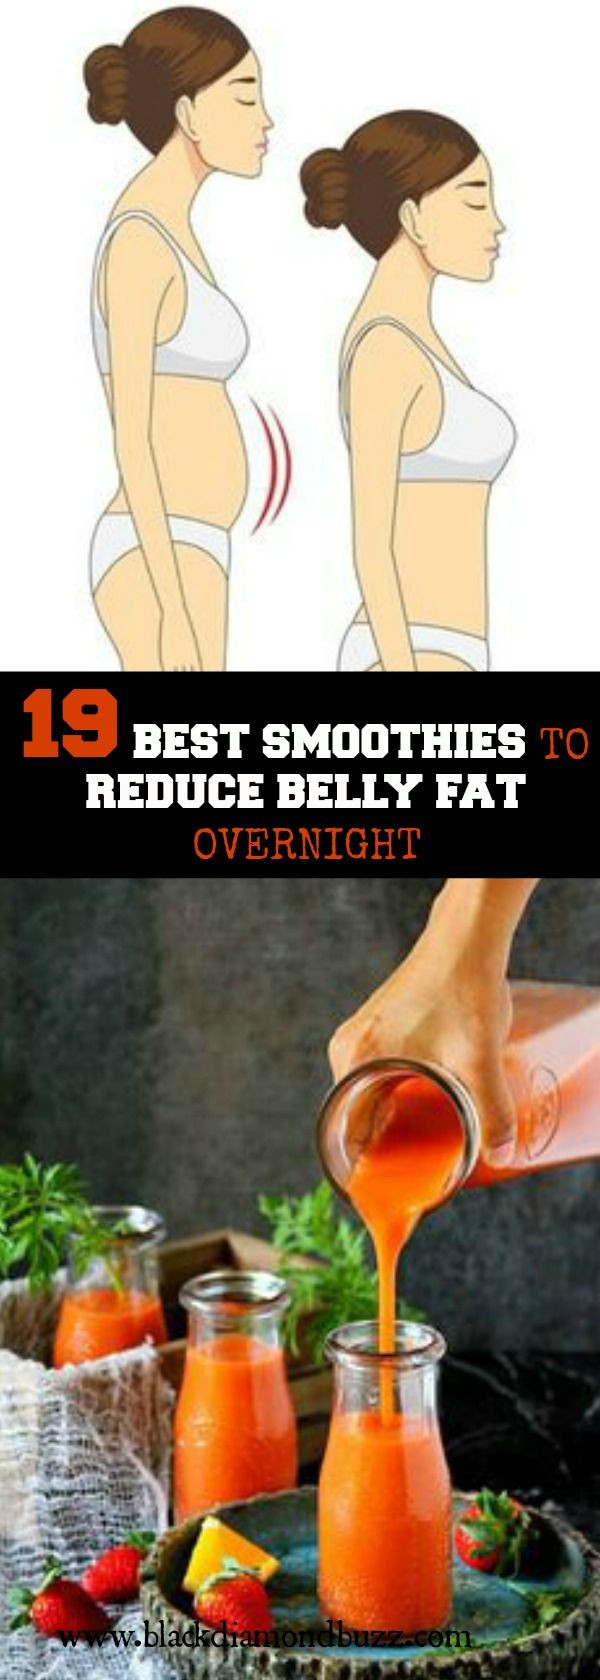 Burn Belly Fat Fast Drink Smoothie Recipes
 Pin on " A Z about Herbal Medicine and Home Reme s